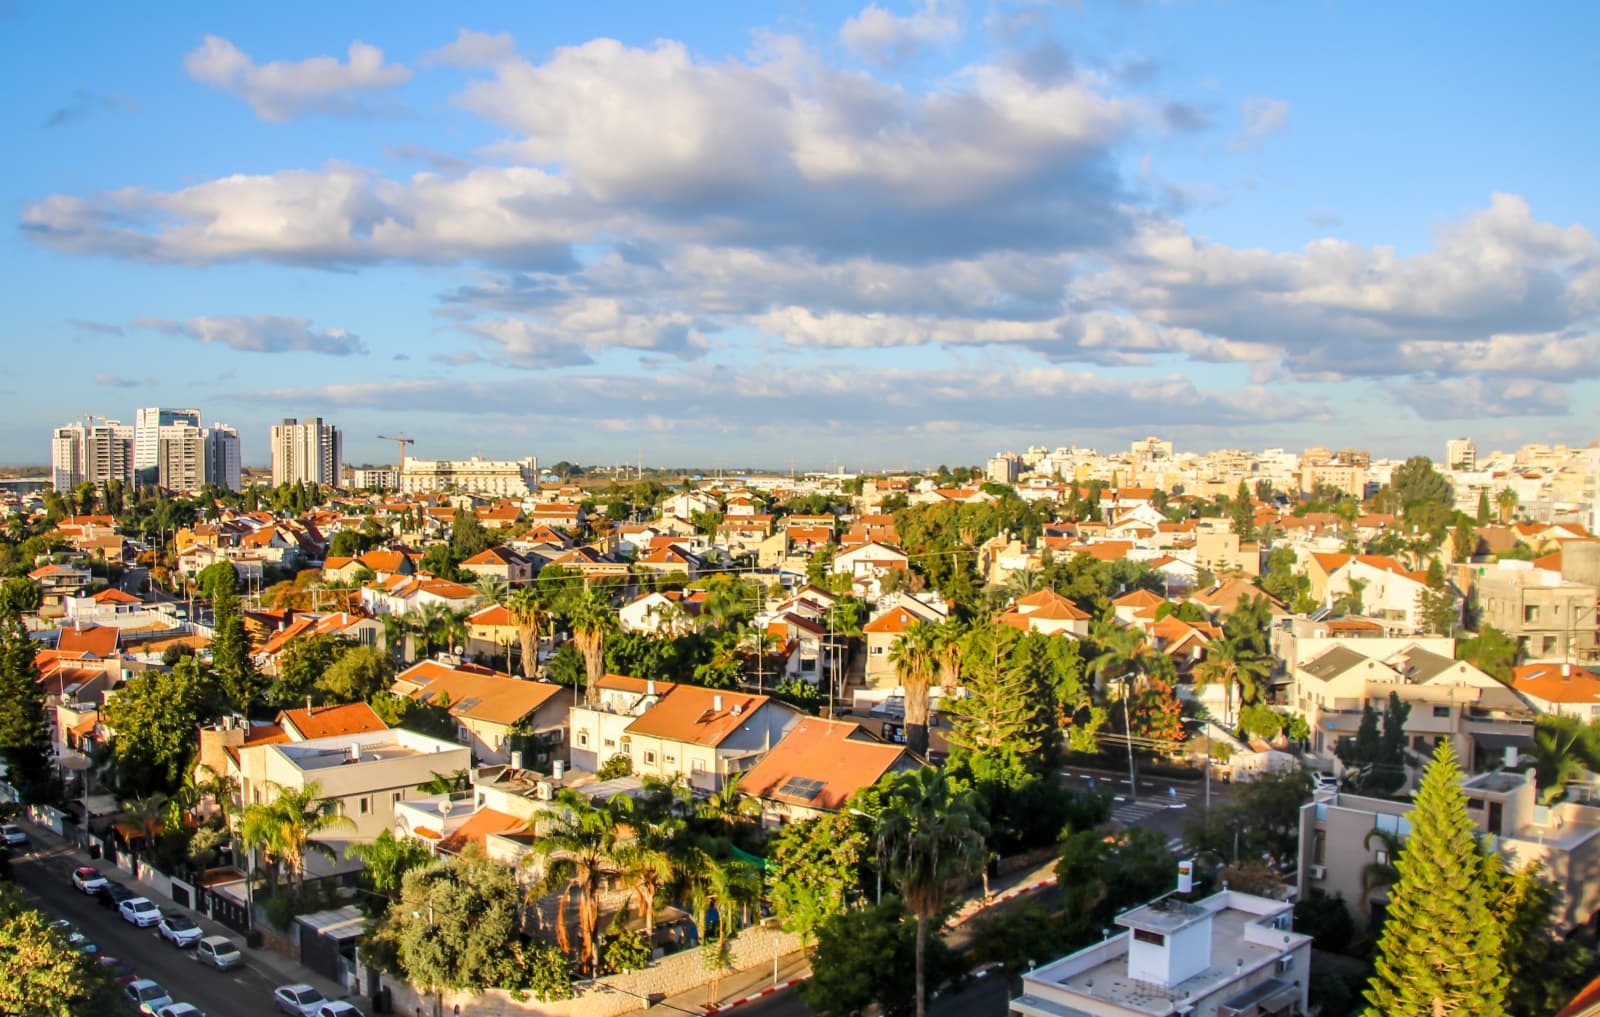 Rooftop view of Rishon LeZion in central Israel. Photo by rontav via Shutterstock.com